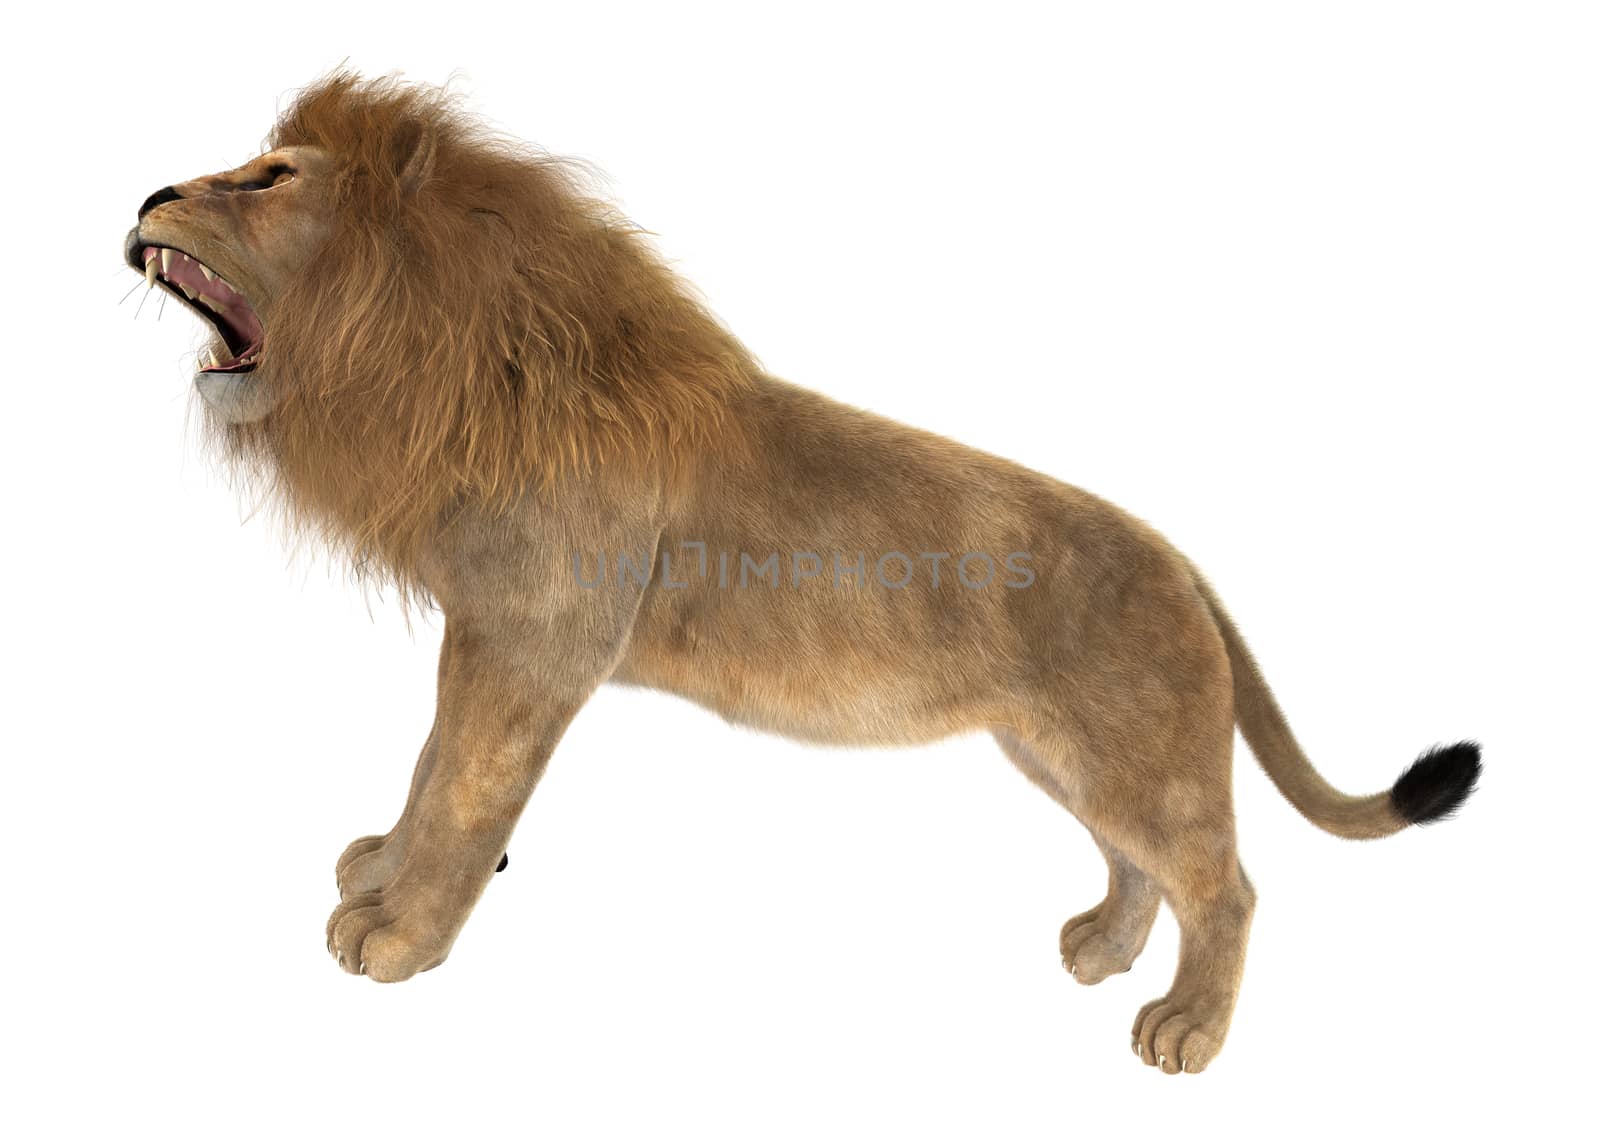 Male Lion by Vac